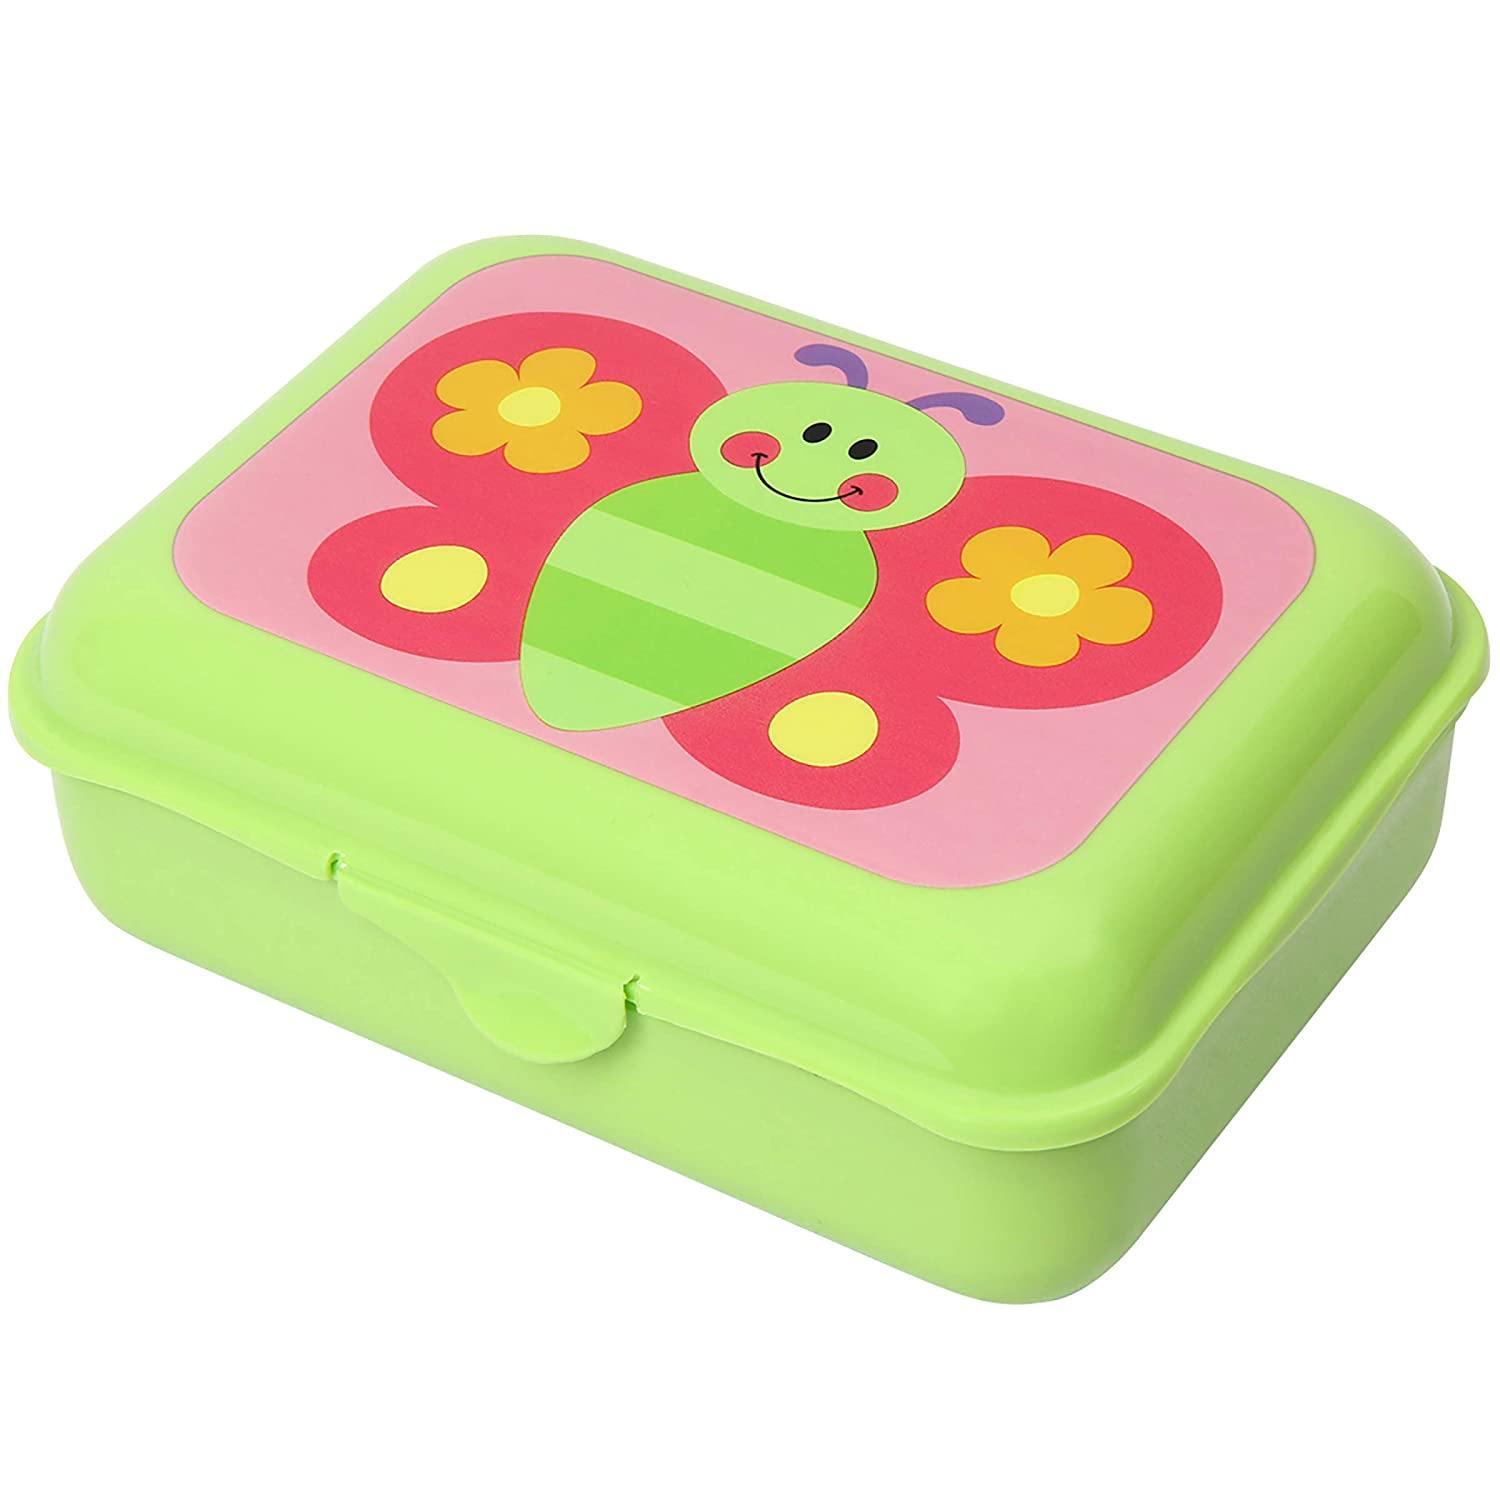 Stephen Joseph Snack Box Butterfly - BumbleToys - 2-4 Years, 5-7 Years, Cecil, Girls, Lunch Box, Pre-Order, School Supplies